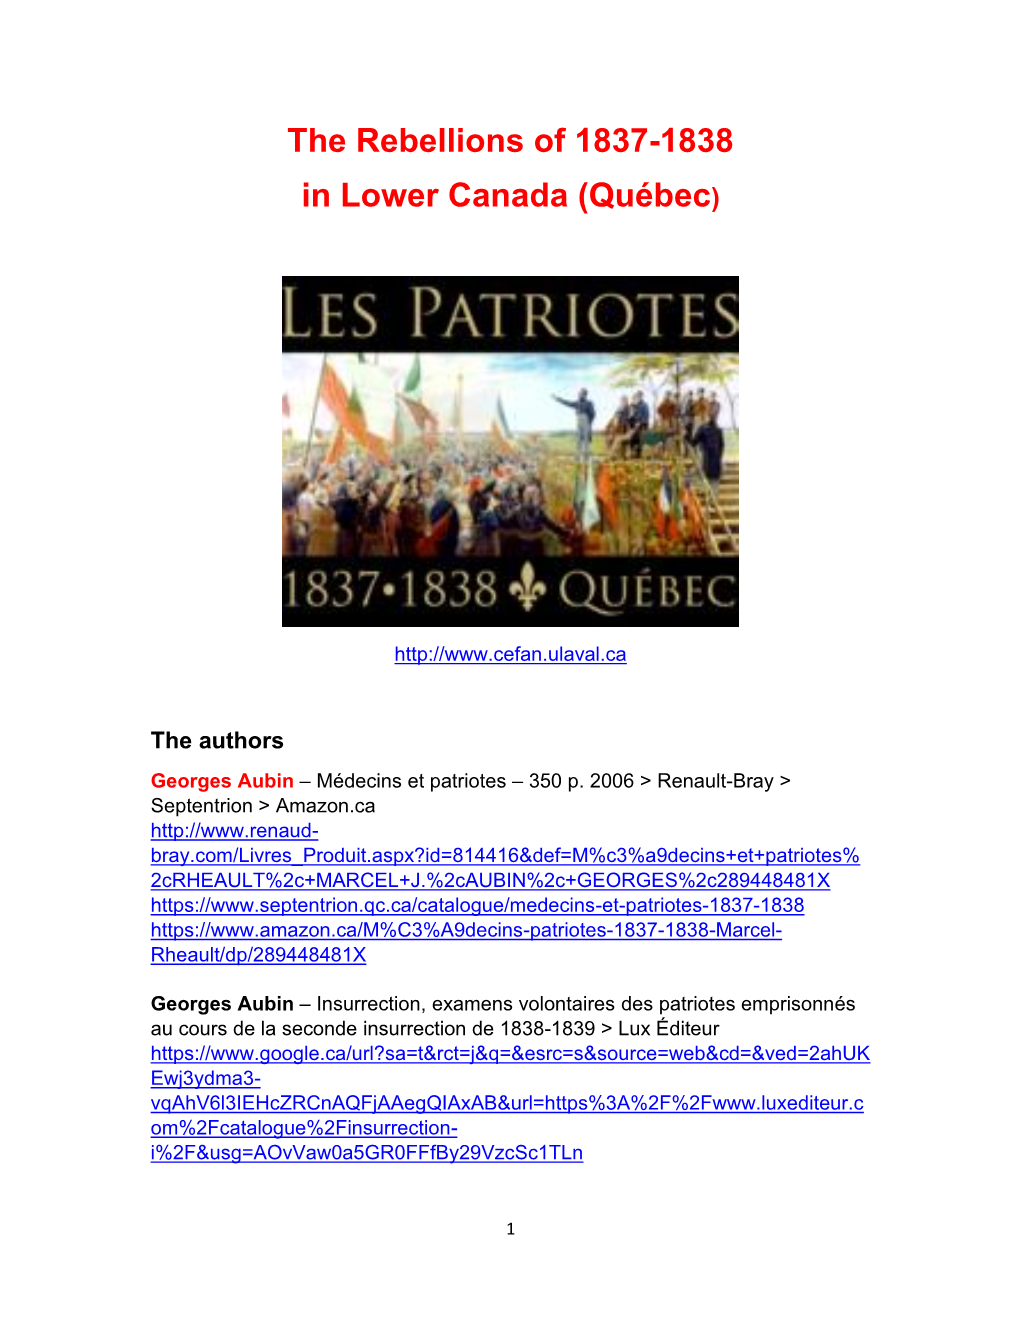 The Rebellions of 1837-1838 in Lower Canada (Québec)